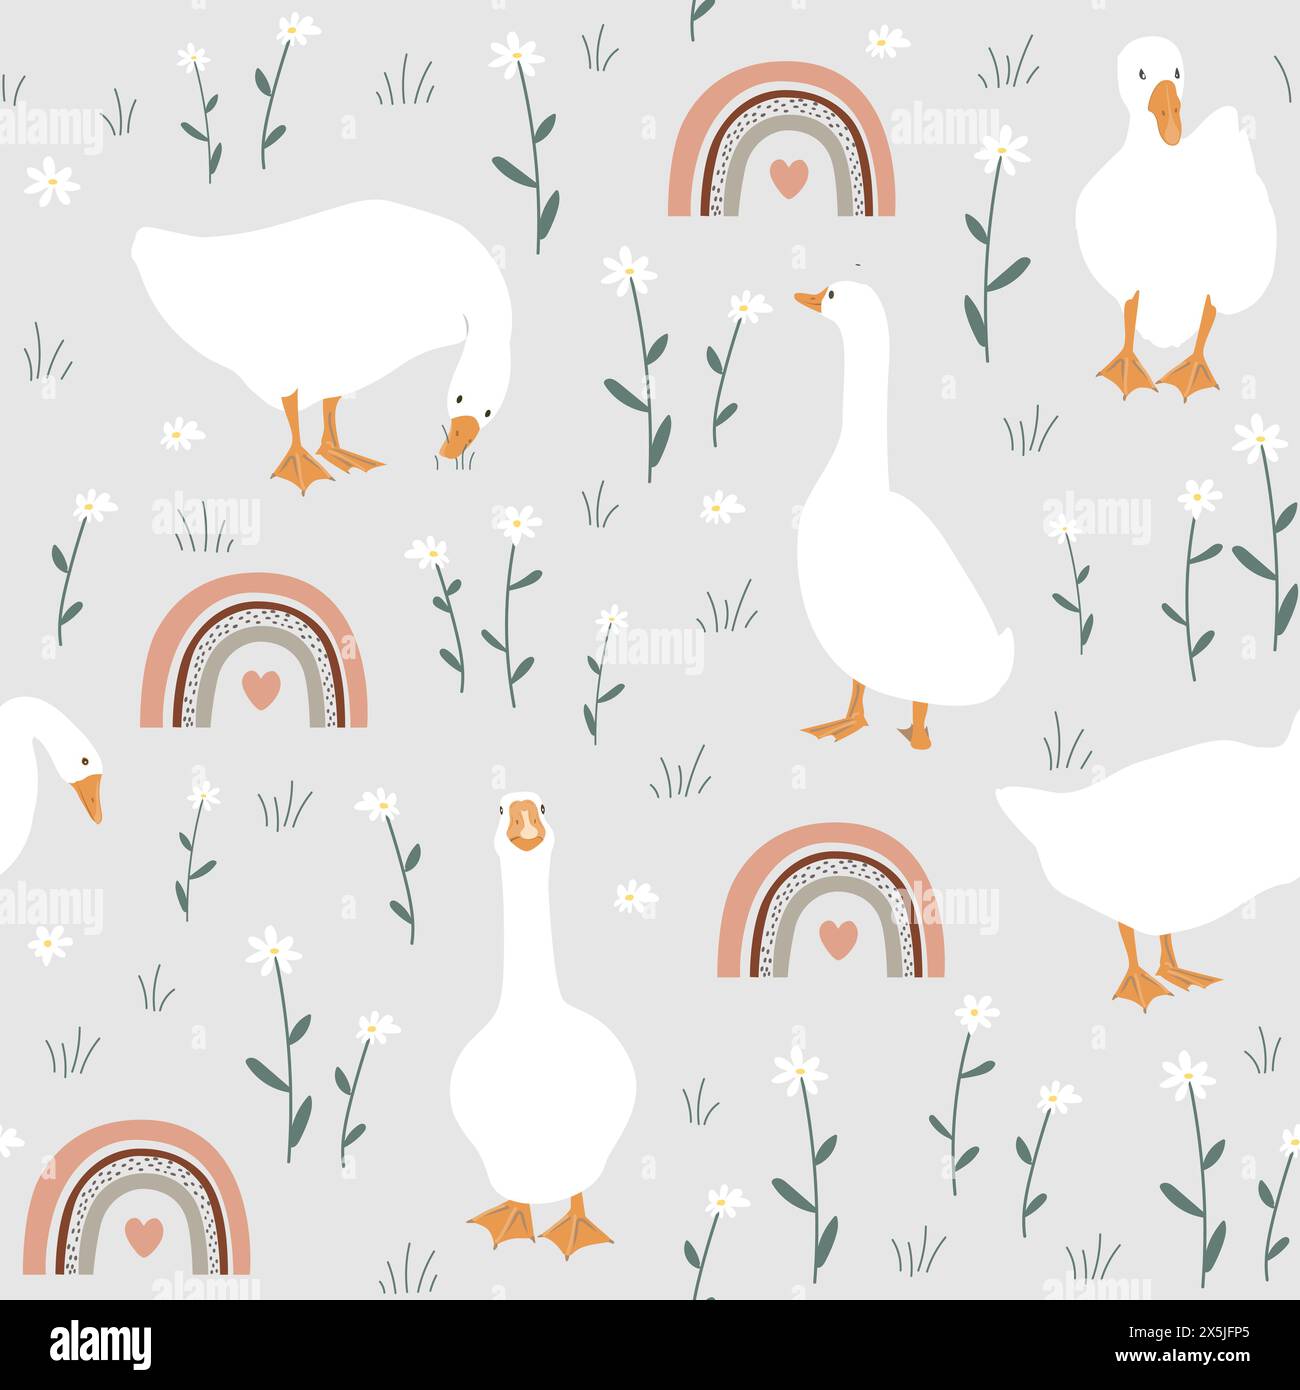 Hand drawn nursery pattern with cute cartoon goose, flowers, and rainbows. Seamless pattern Stock Vector